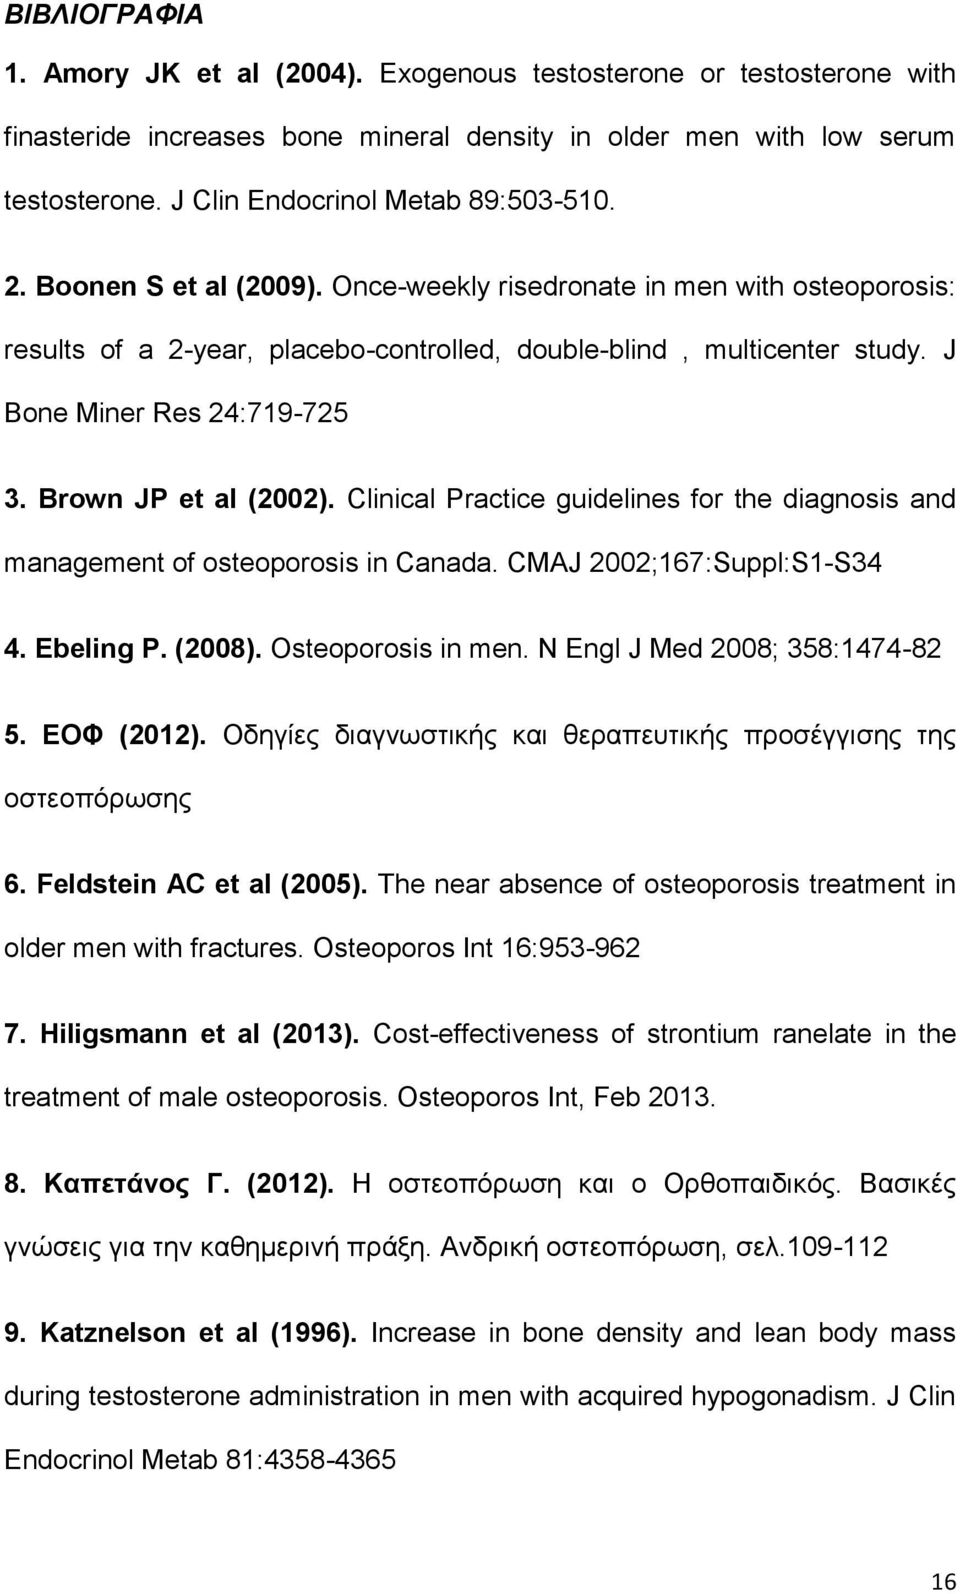 J Bone Miner Res 24:719-725 3. Brown JP et al (2002). Clinical Practice guidelines for the diagnosis and management of osteoporosis in Canada. CMAJ 2002;167:Suppl:S1-S34 4. Ebeling P. (2008).